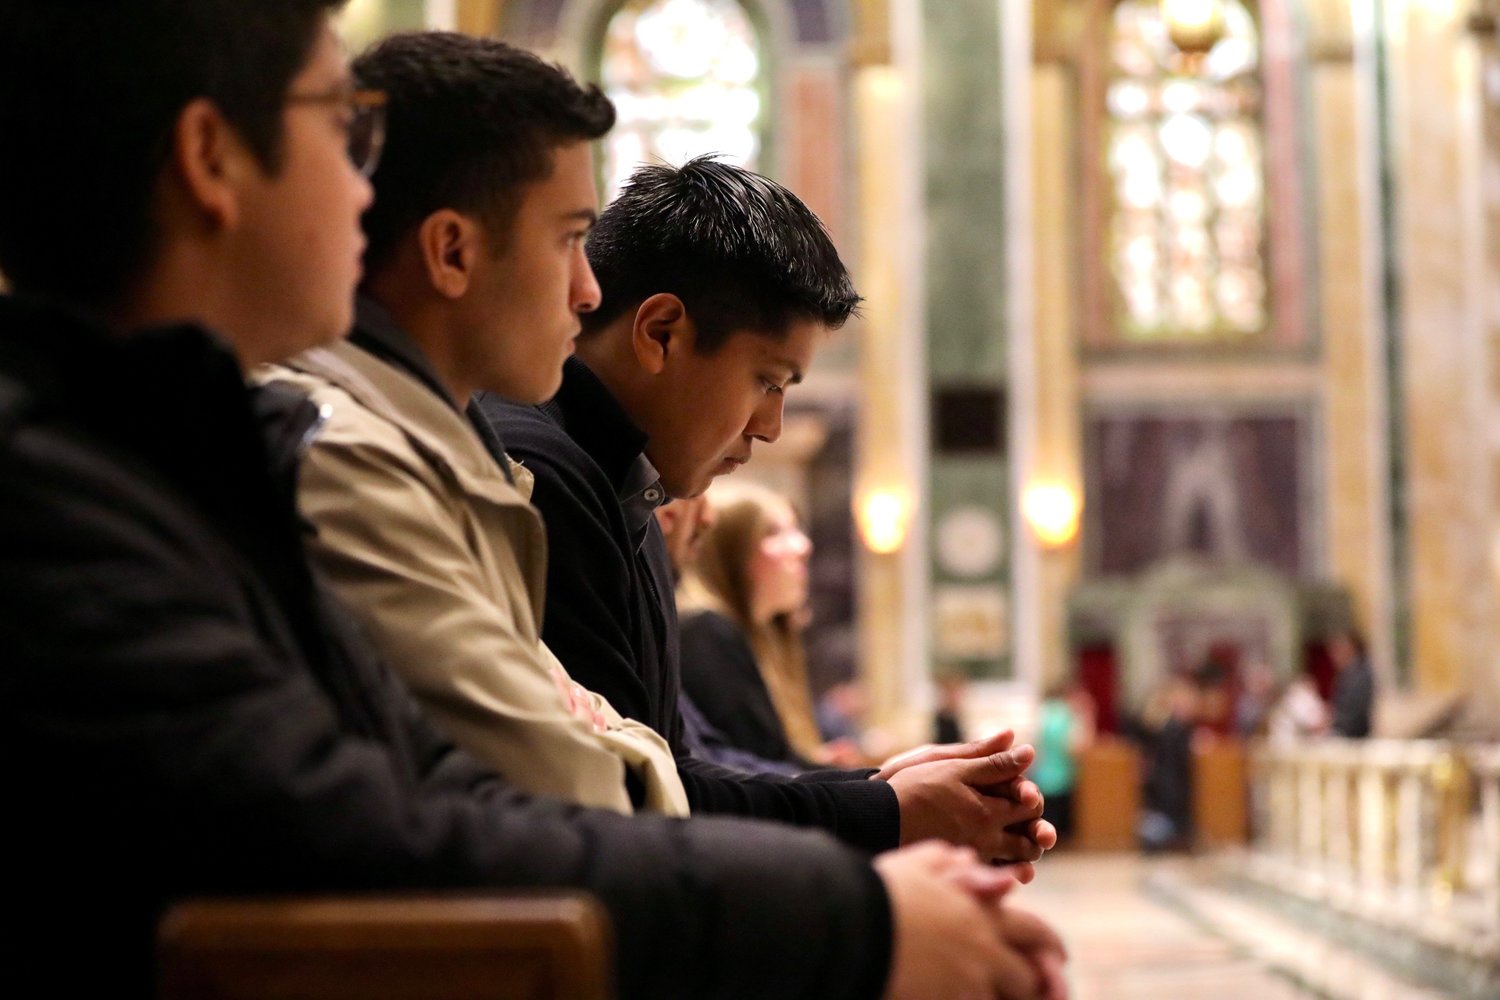 Young men pray during the Youth Mass of Celebration and Thanksgiving on Jan. 20, 2023 at the Cathedral of St. Matthew the Apostle in Washington.